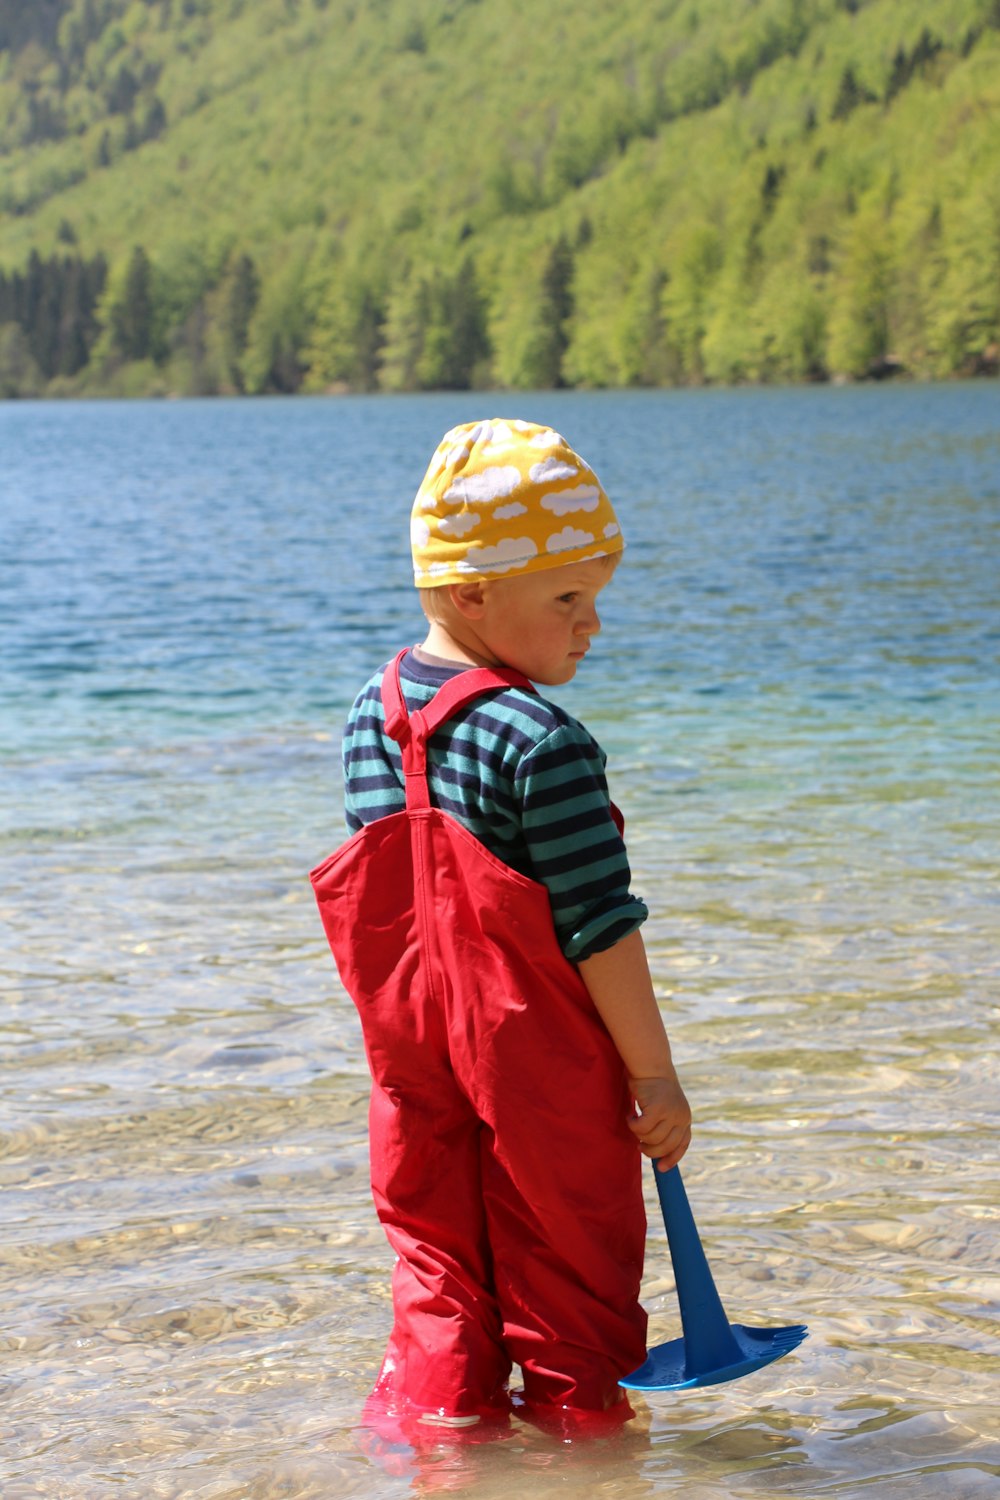 boy in red dungarees standing on seashore